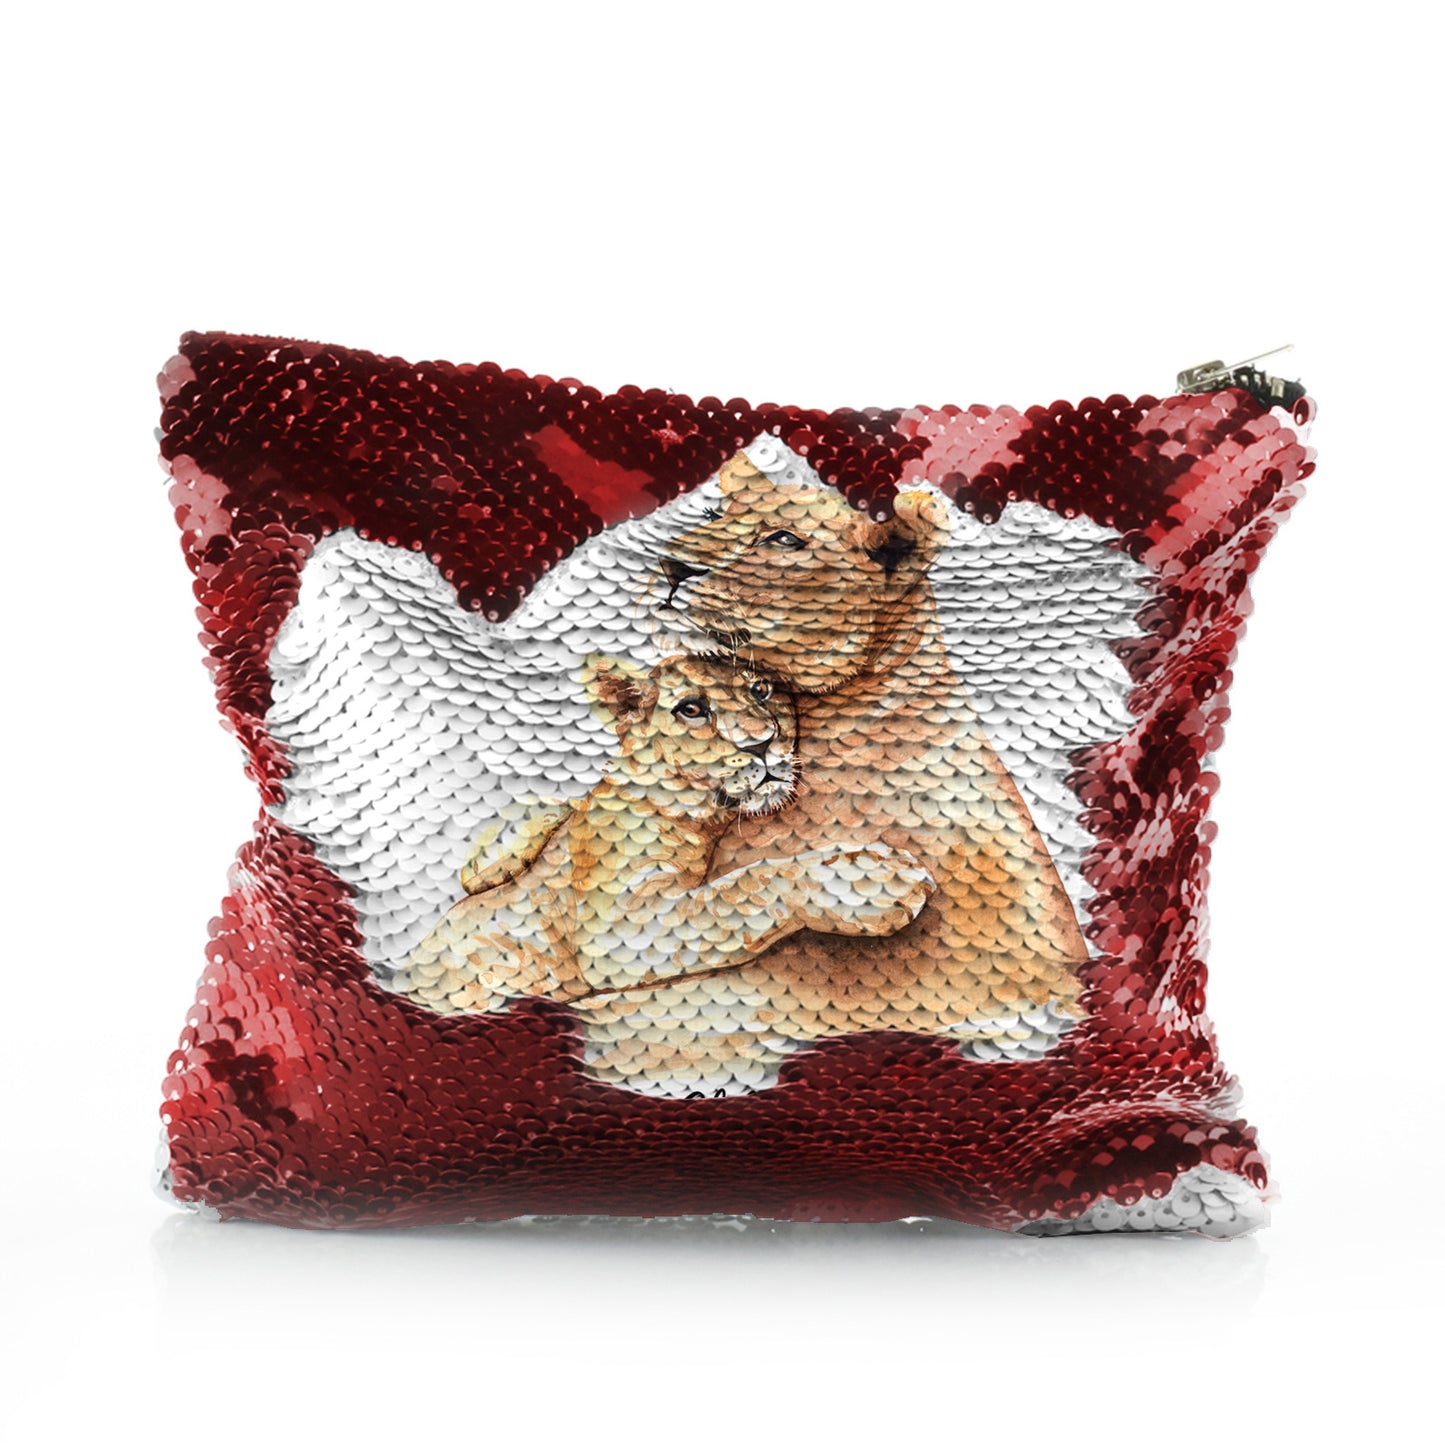 Personalised Sequin Zip Bag with Welcoming Text and Embracing Mum and Baby Lions